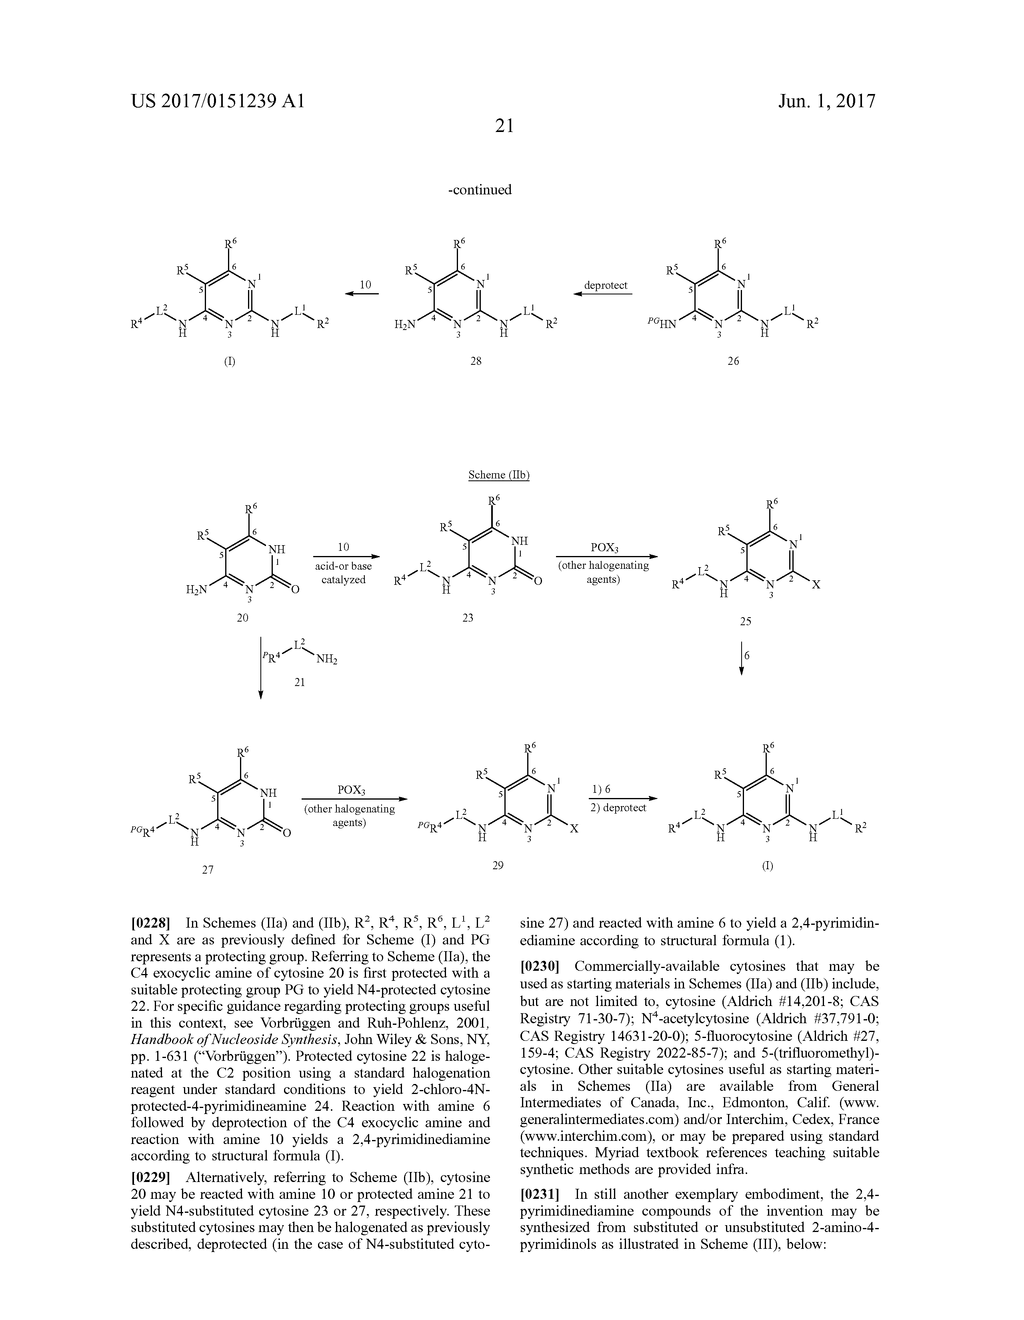 2,4-Pyrimidinediamine Compounds and Their Uses - diagram, schematic, and image 36